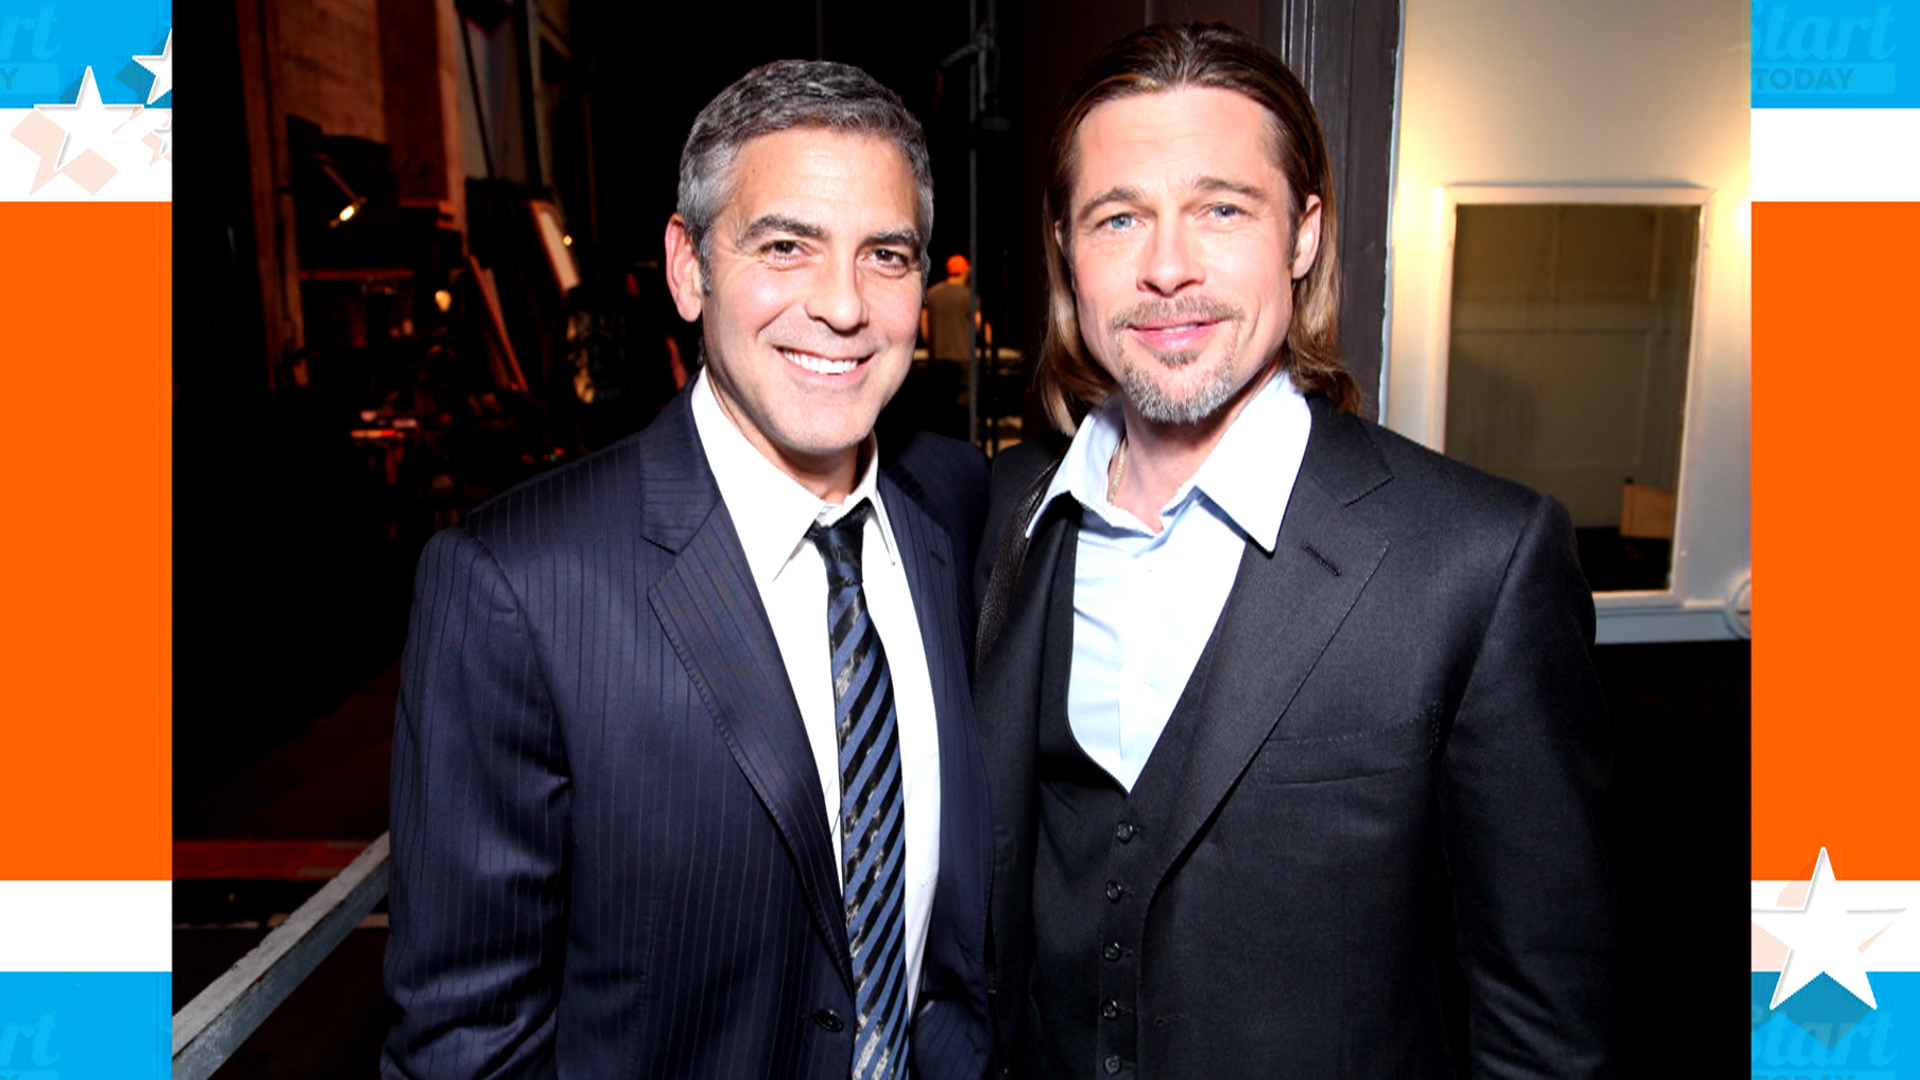 George Clooney: Latest prank on Brad Pitt will get me arrested - TODAY.com1920 x 1080